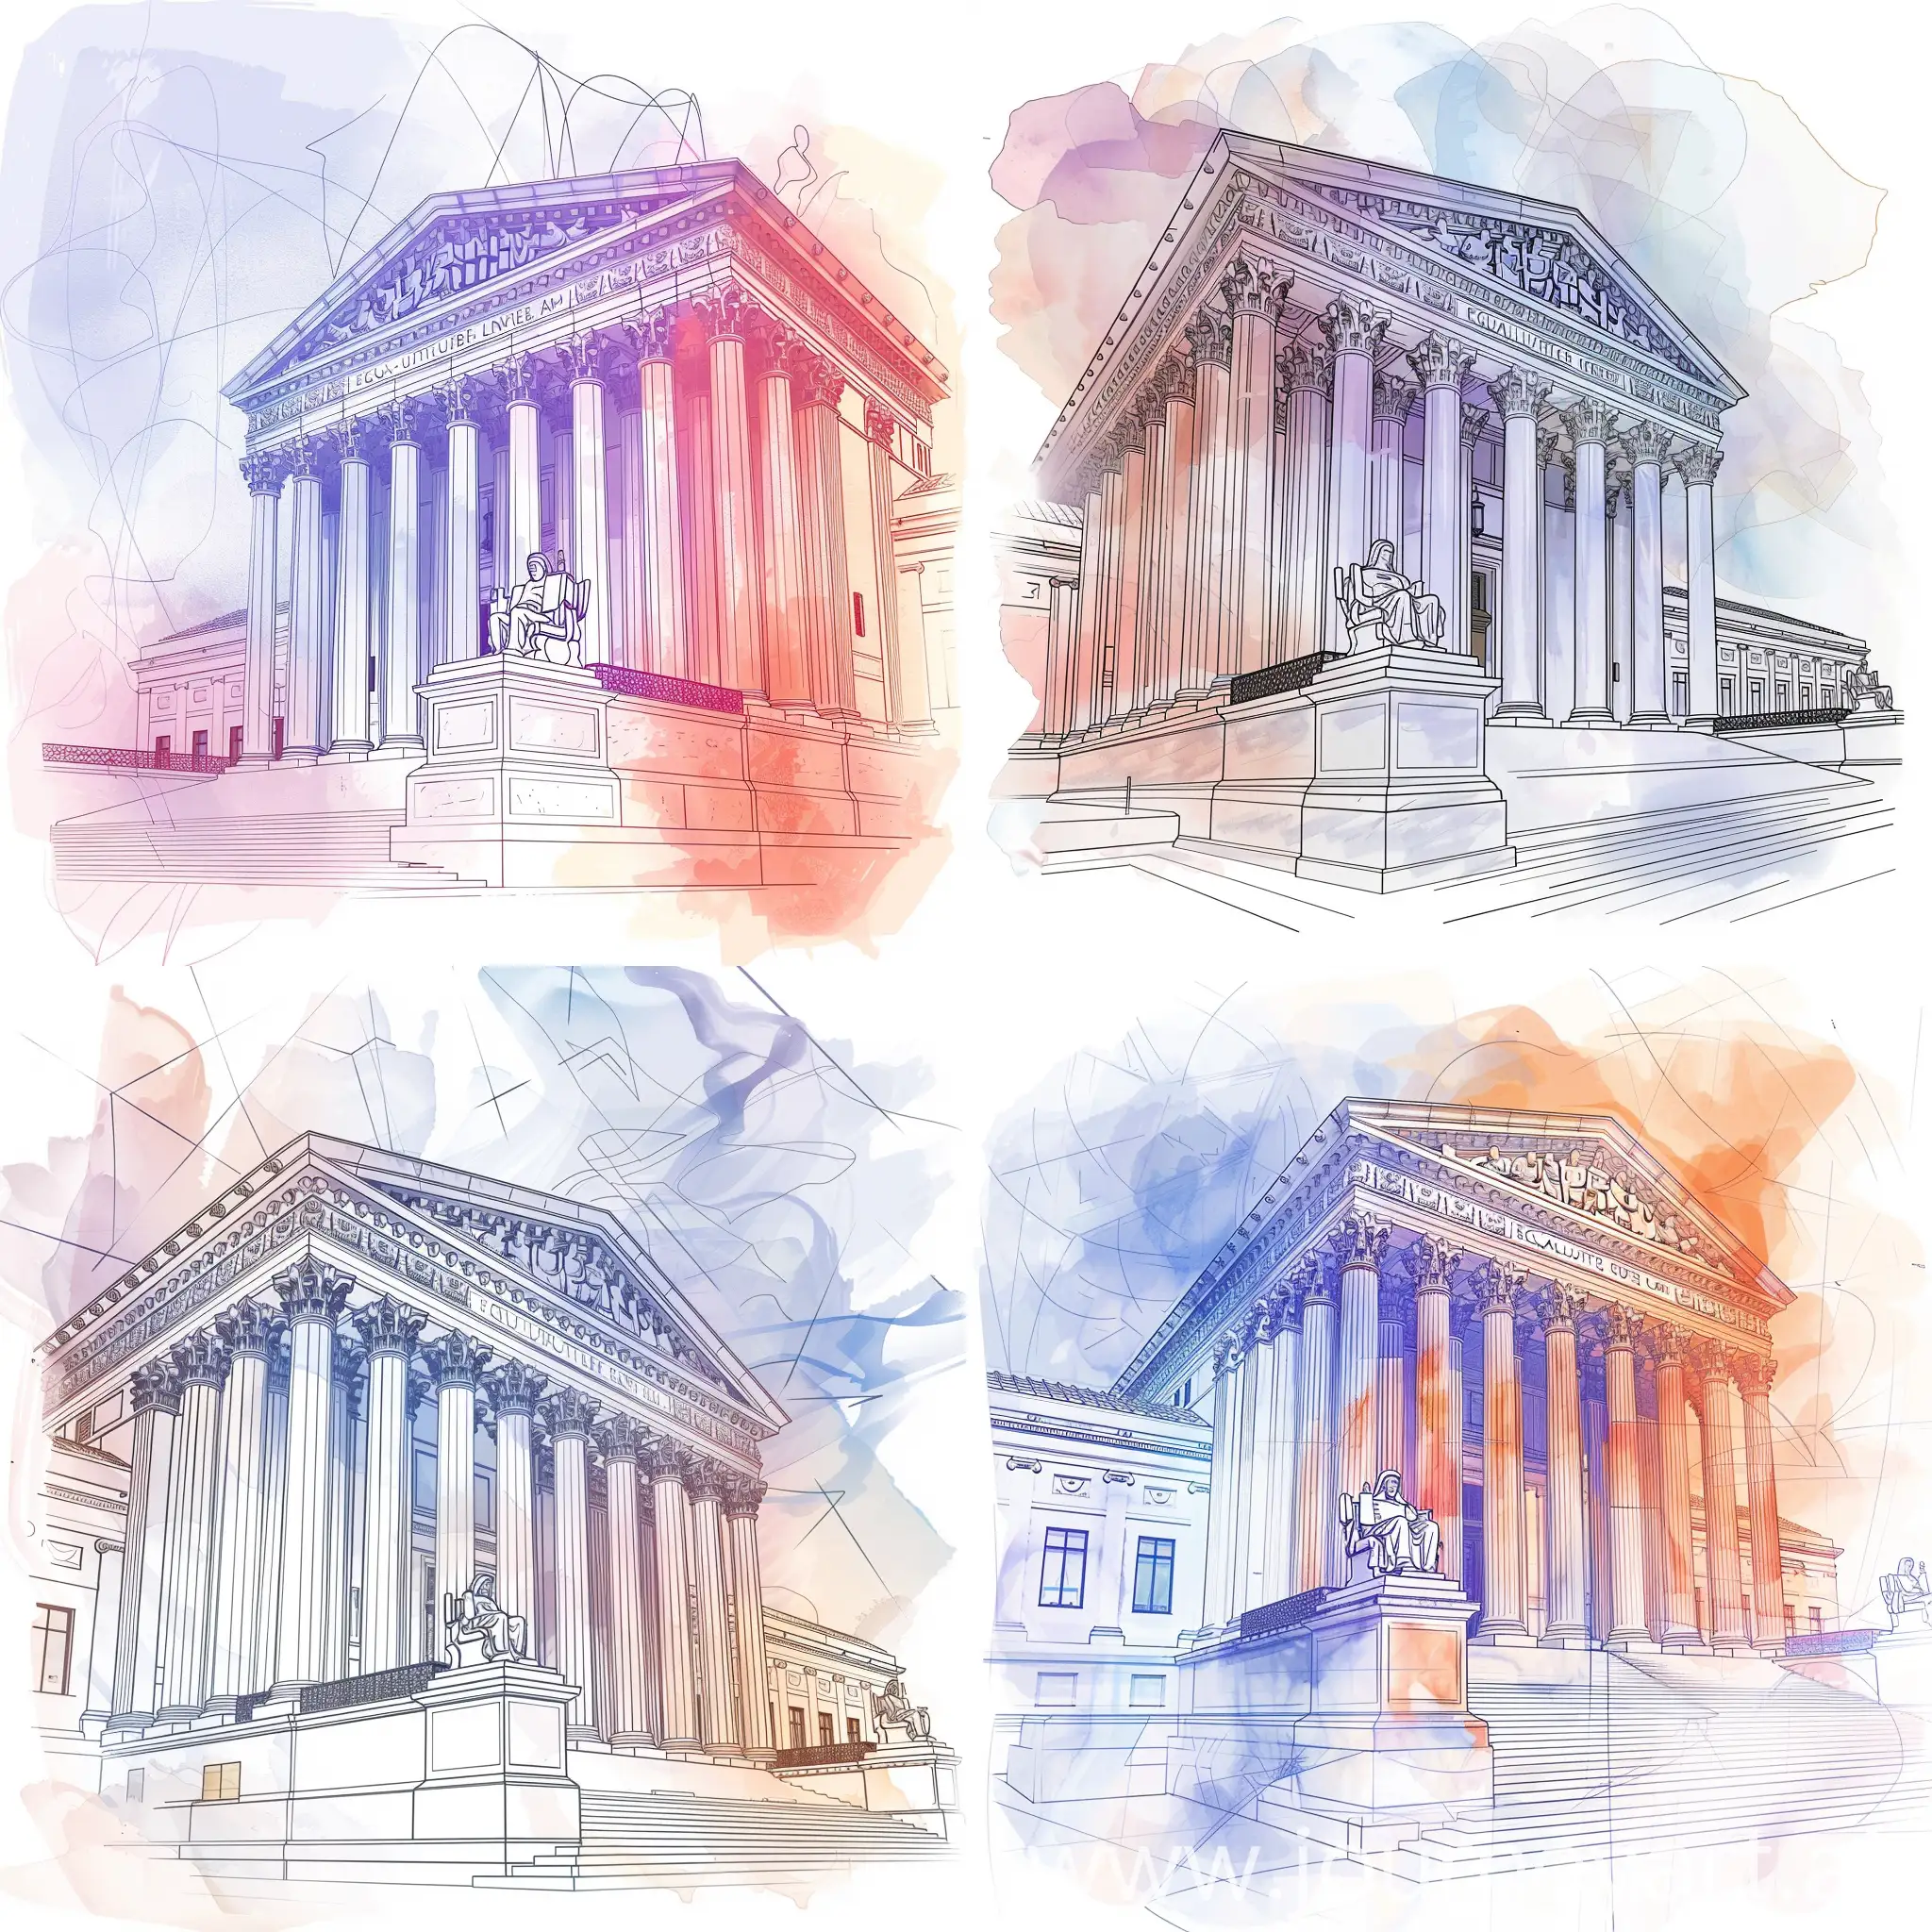 Historical-Supreme-Court-Fine-Line-Drawing-with-Architectural-Elegance